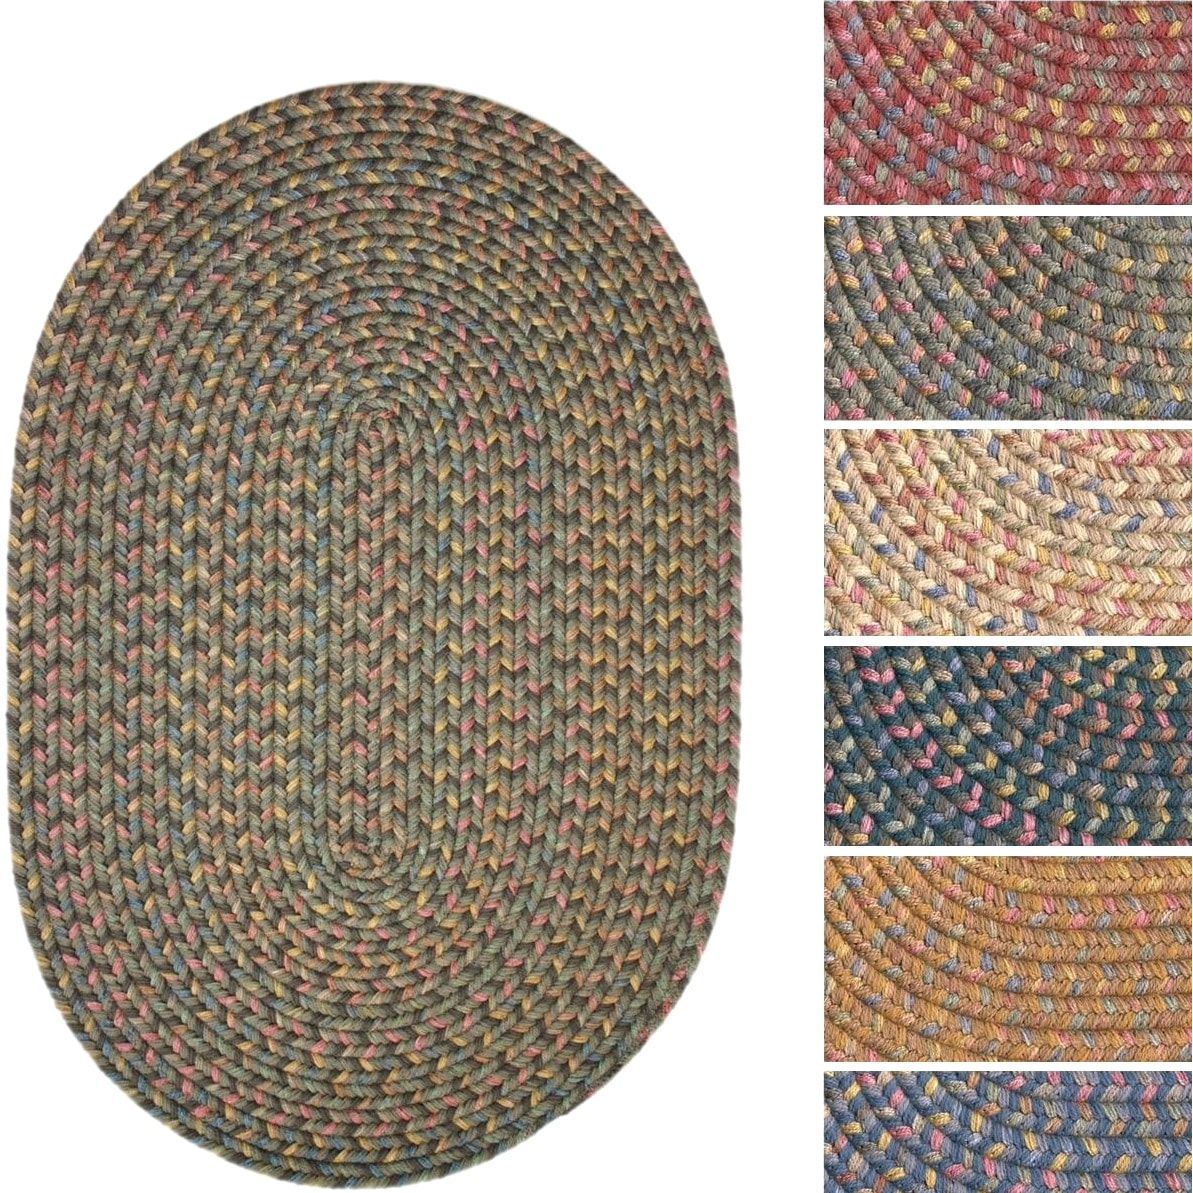 Bouquet Multicolored Braided Area Rug (2 X 3 Oval)